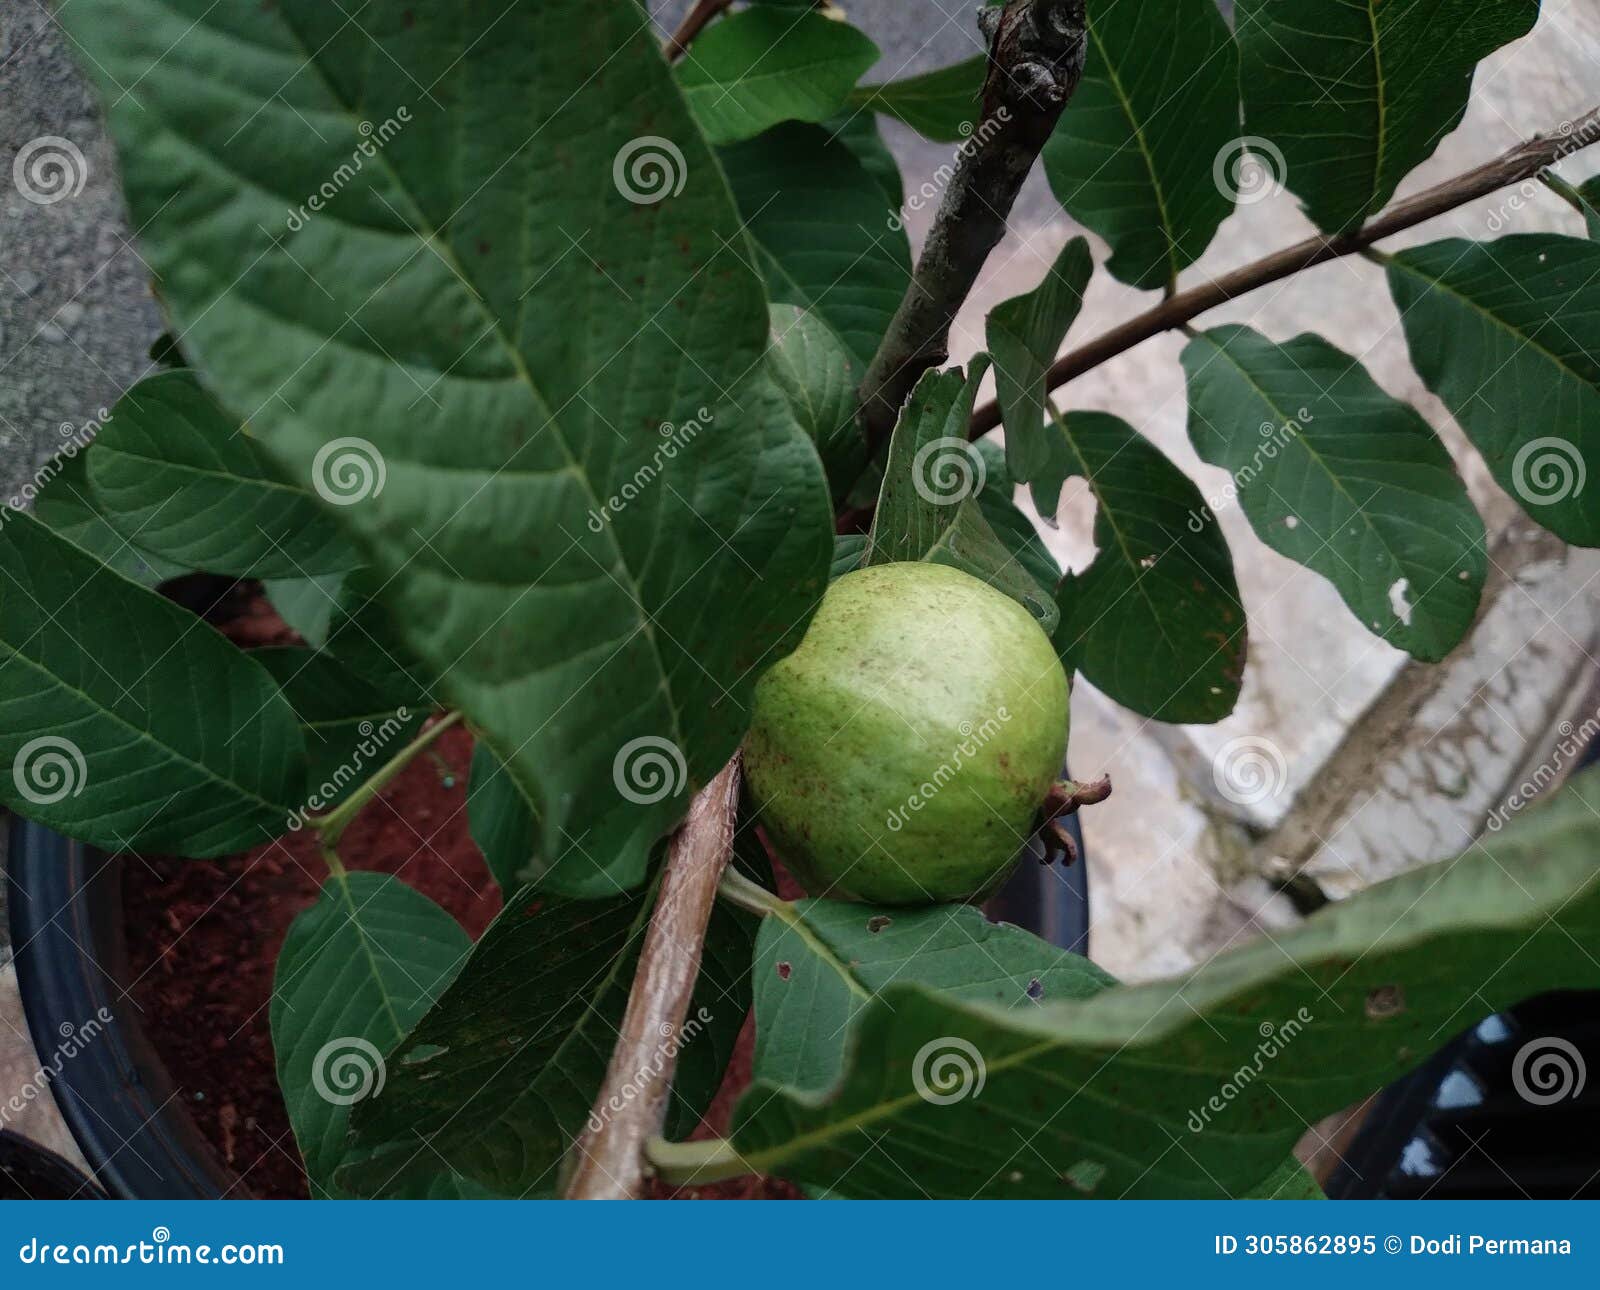 crystal guava grows healthily in the yard